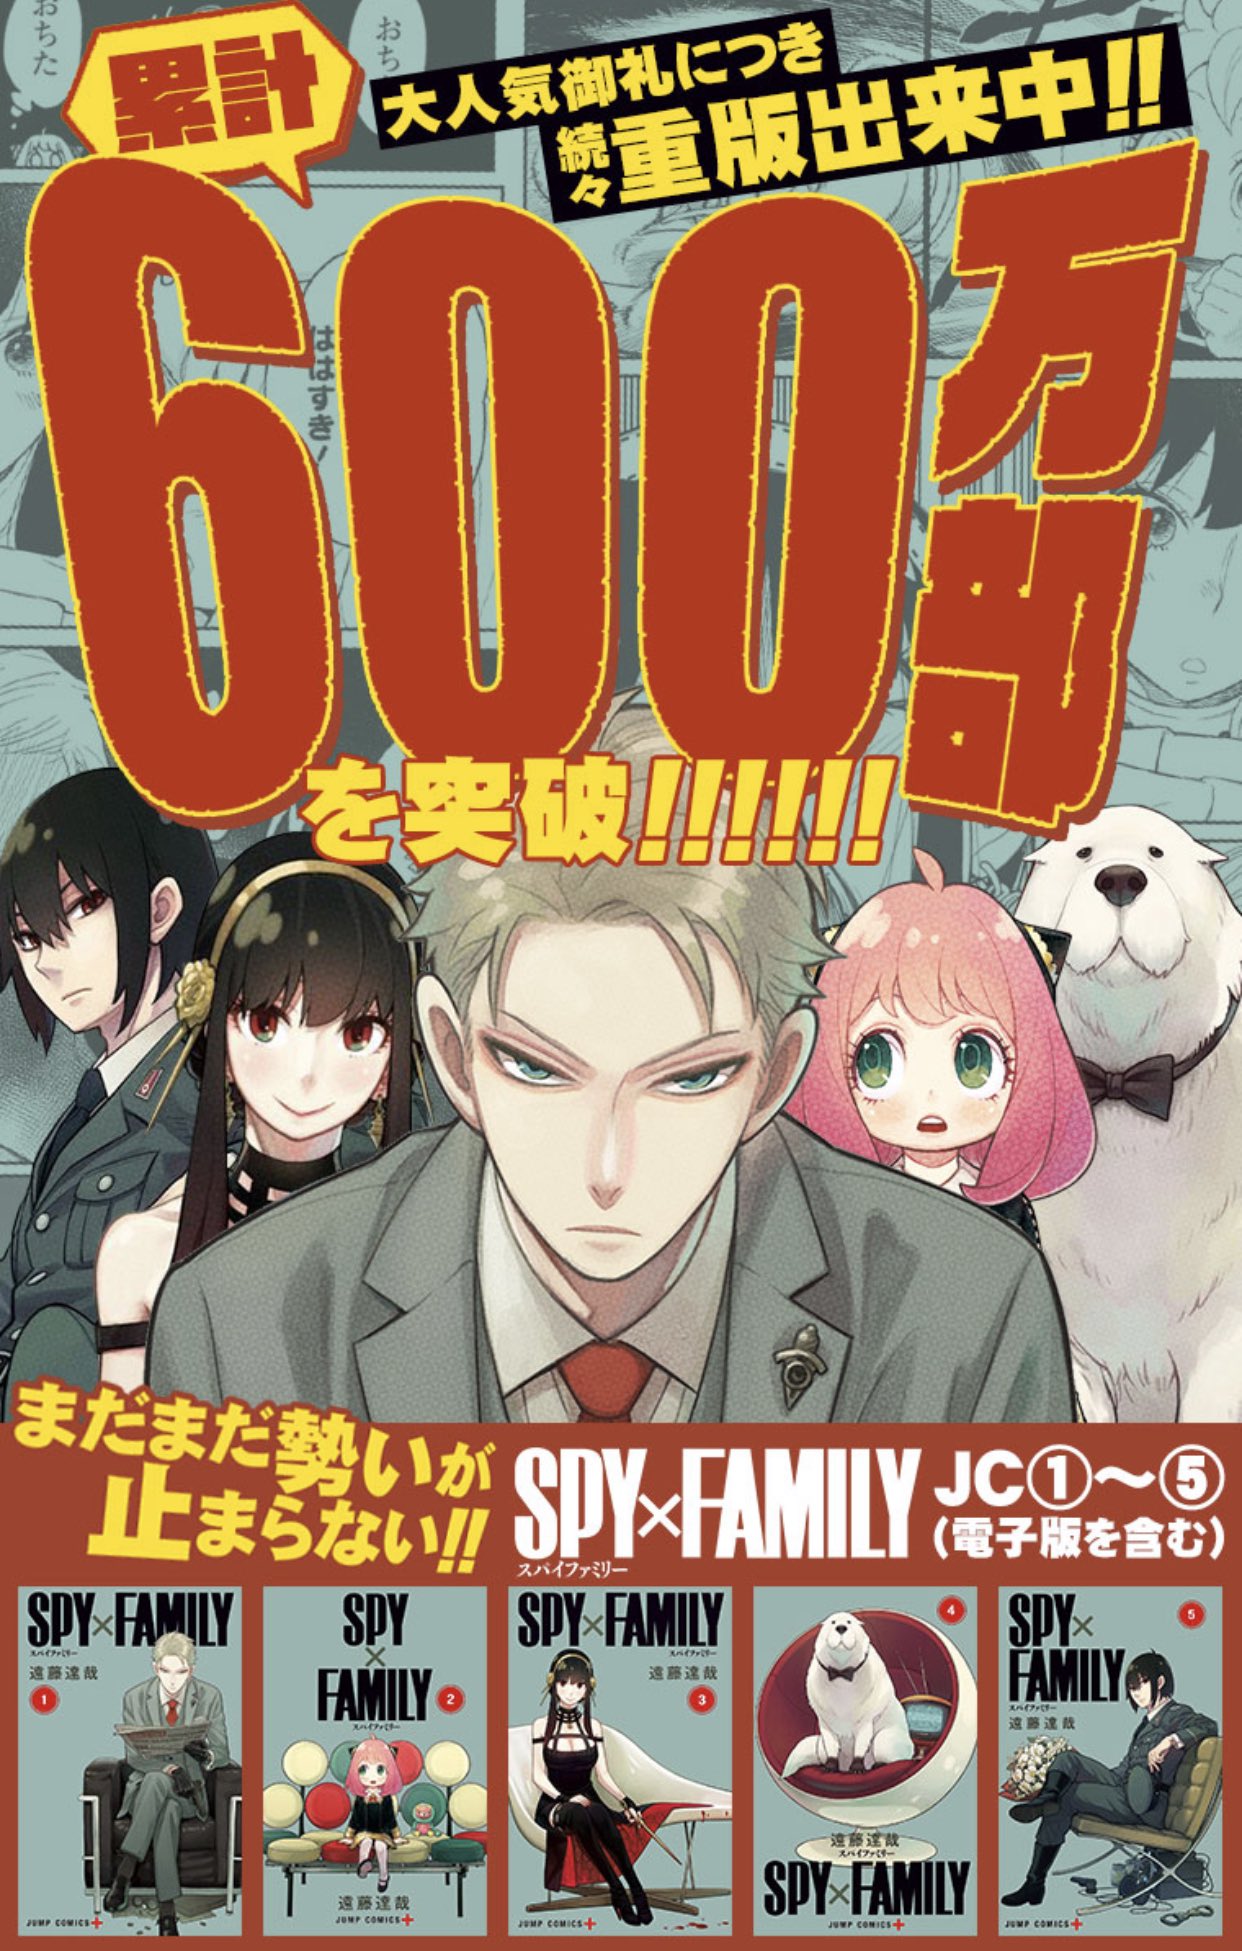 SPY x FAMILY Manga has more than 6 million copies in circulation